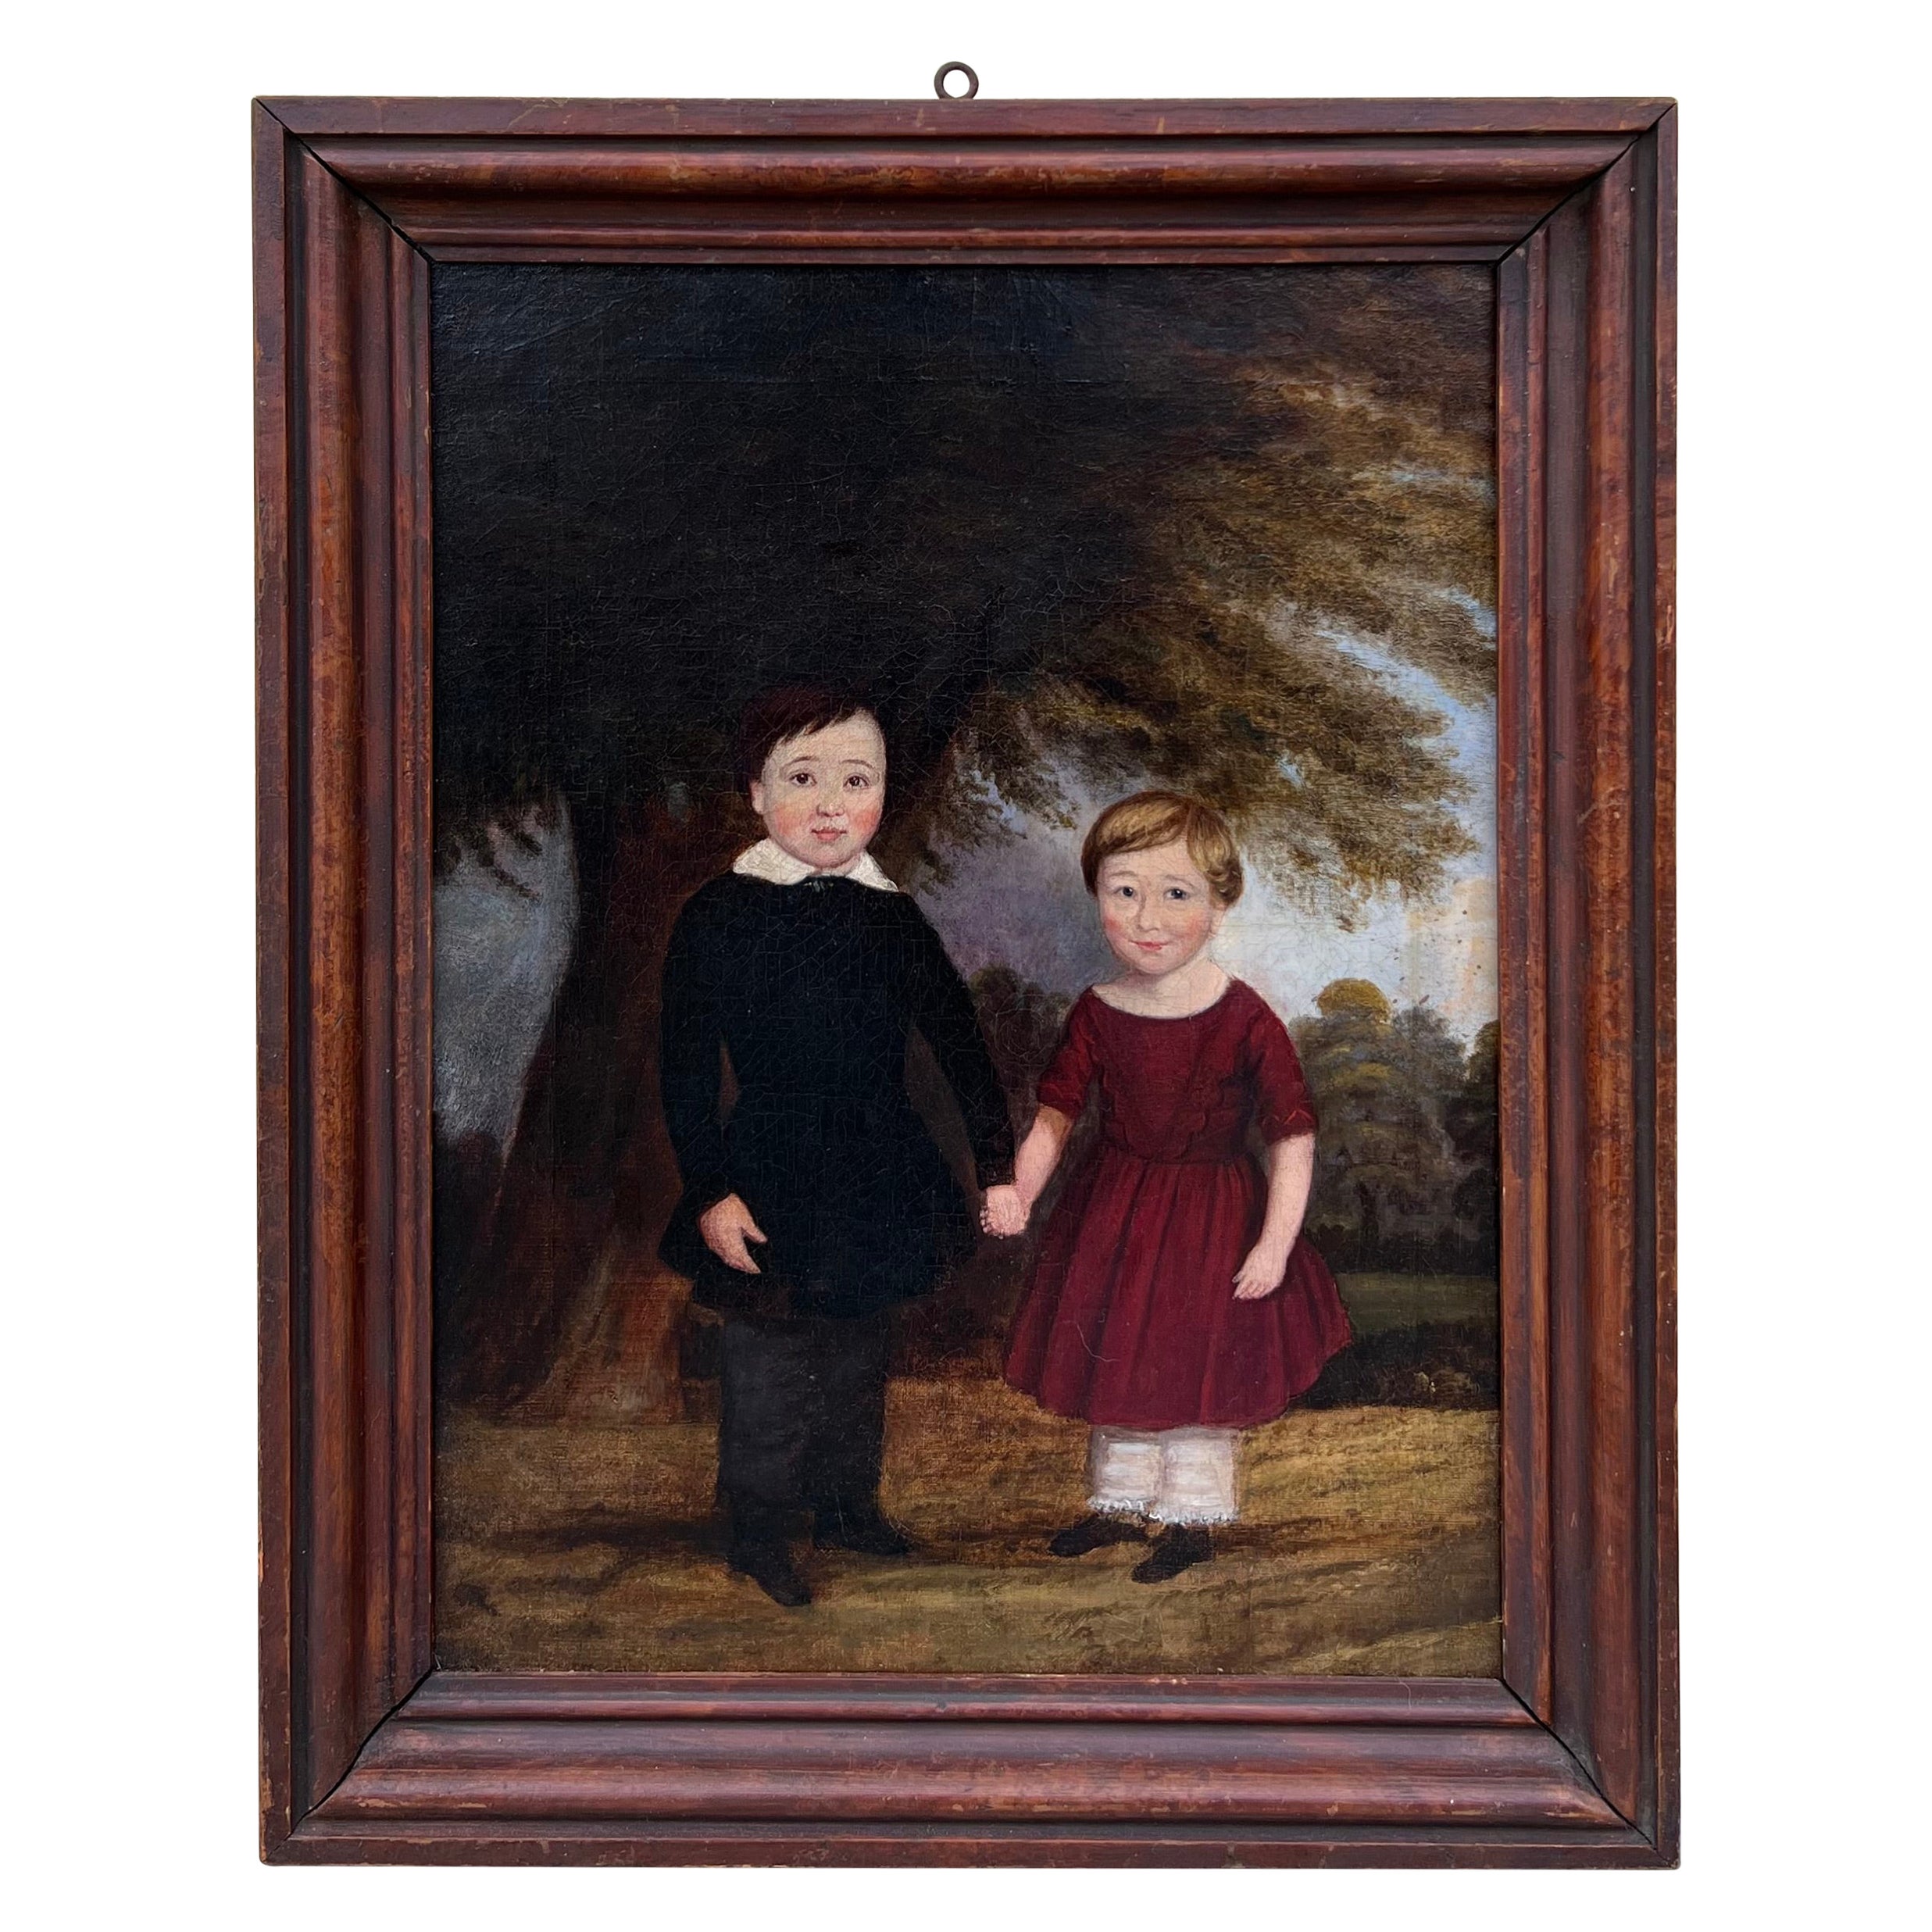 Early 19th Century English Naive School Painting of Children